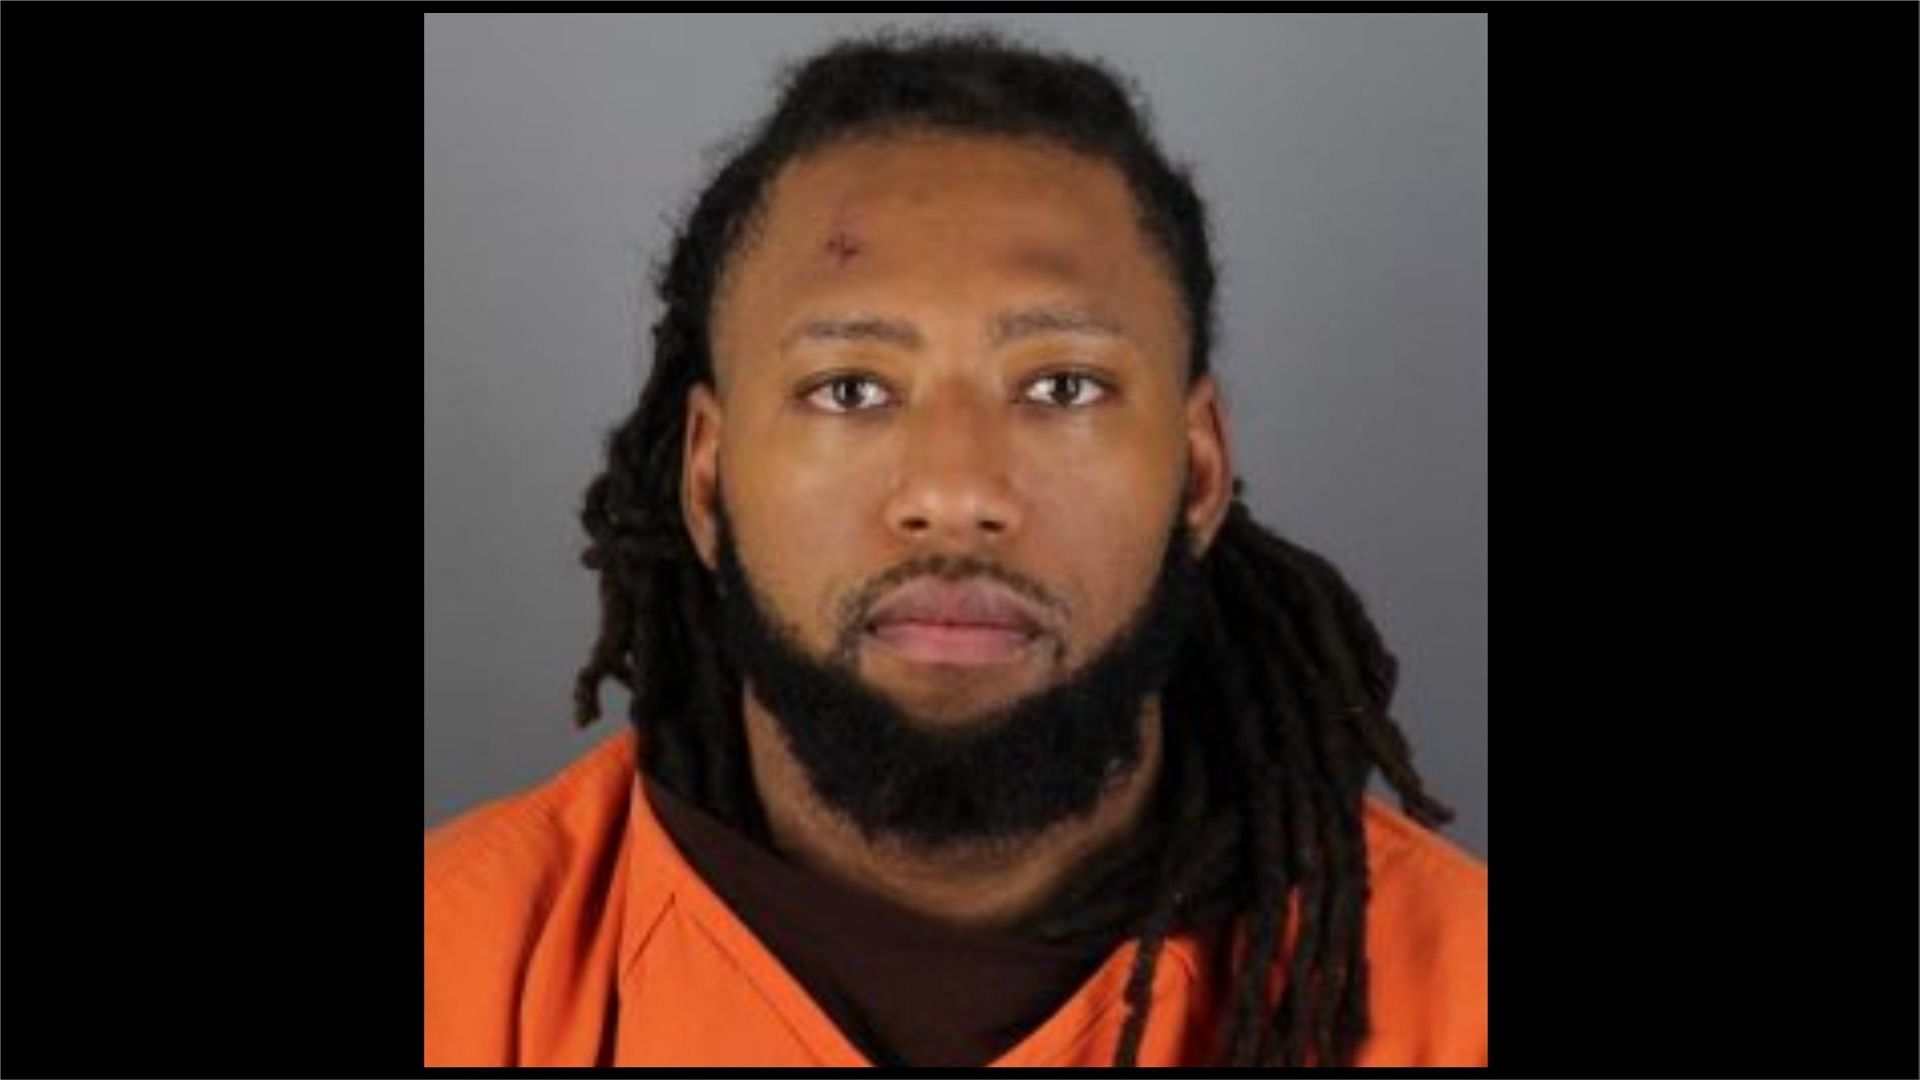 Derrick John Thompson has been arrested in connection to a fatal car crash, (Image via @NatCon2022/Twitter)